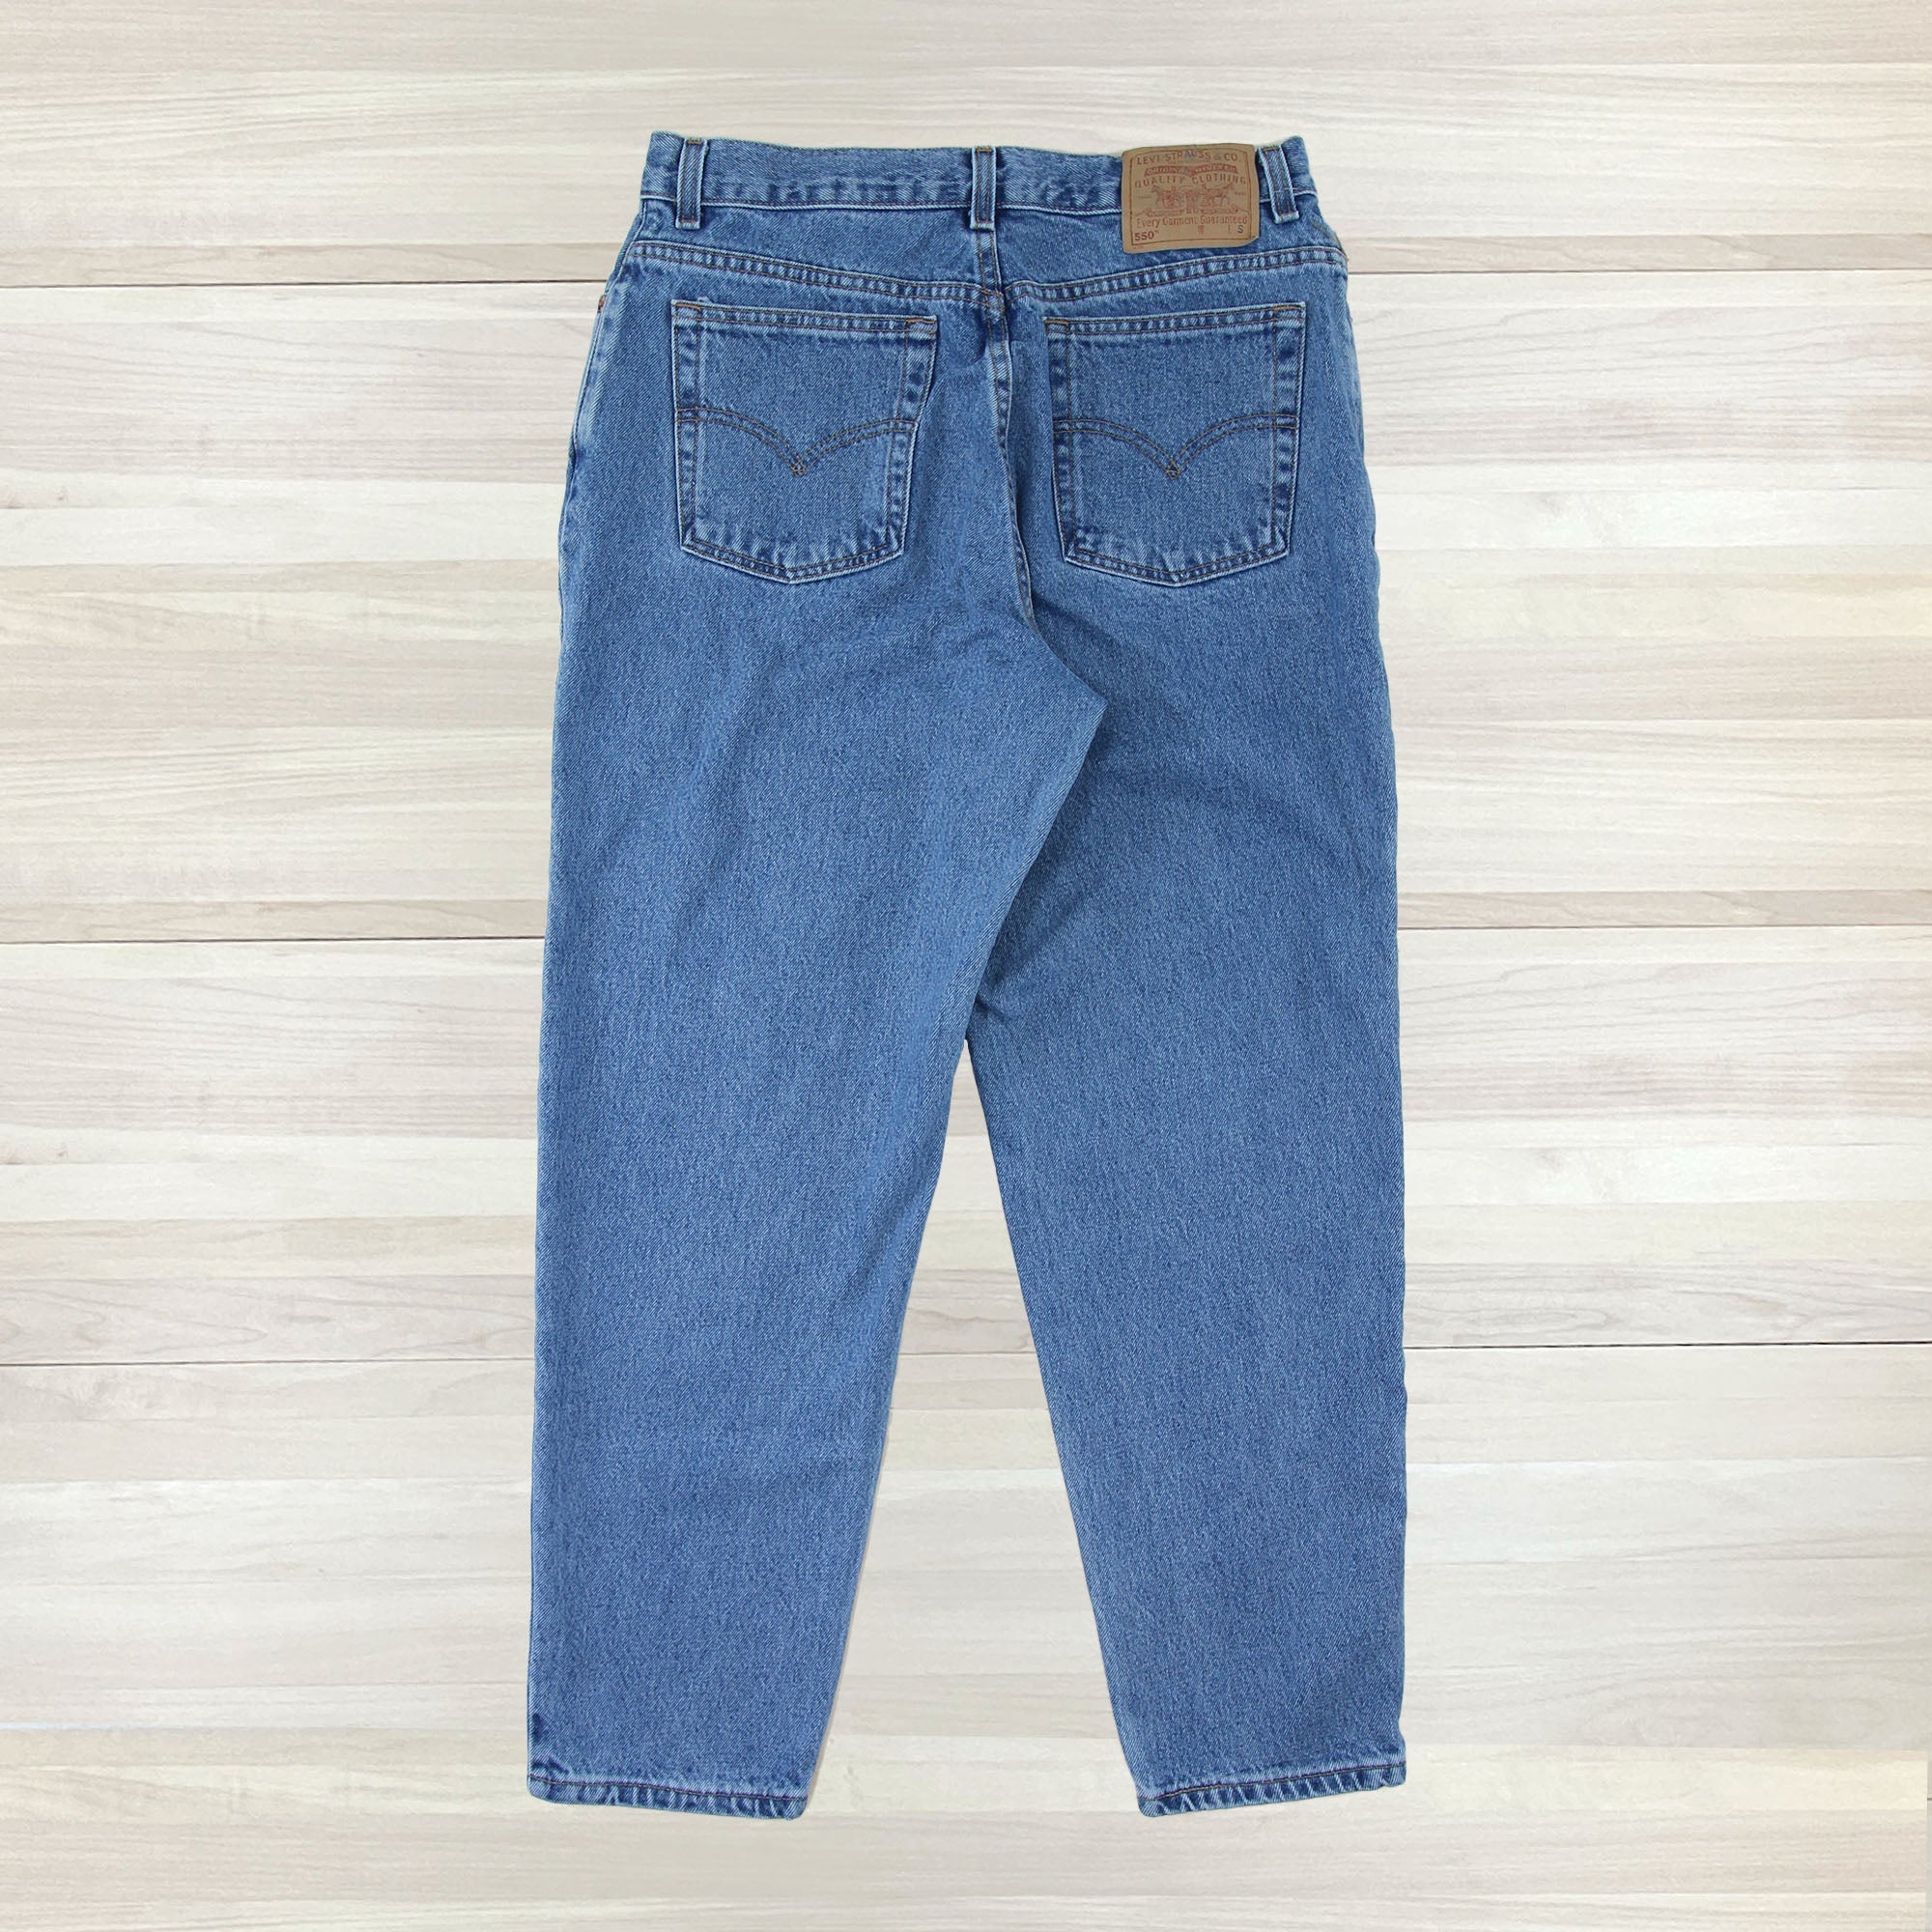 Women's Vintage 90s Levi's 550 Relaxed Fit Tapered Leg - 31x29 Great Lakes Reclaimed Denim